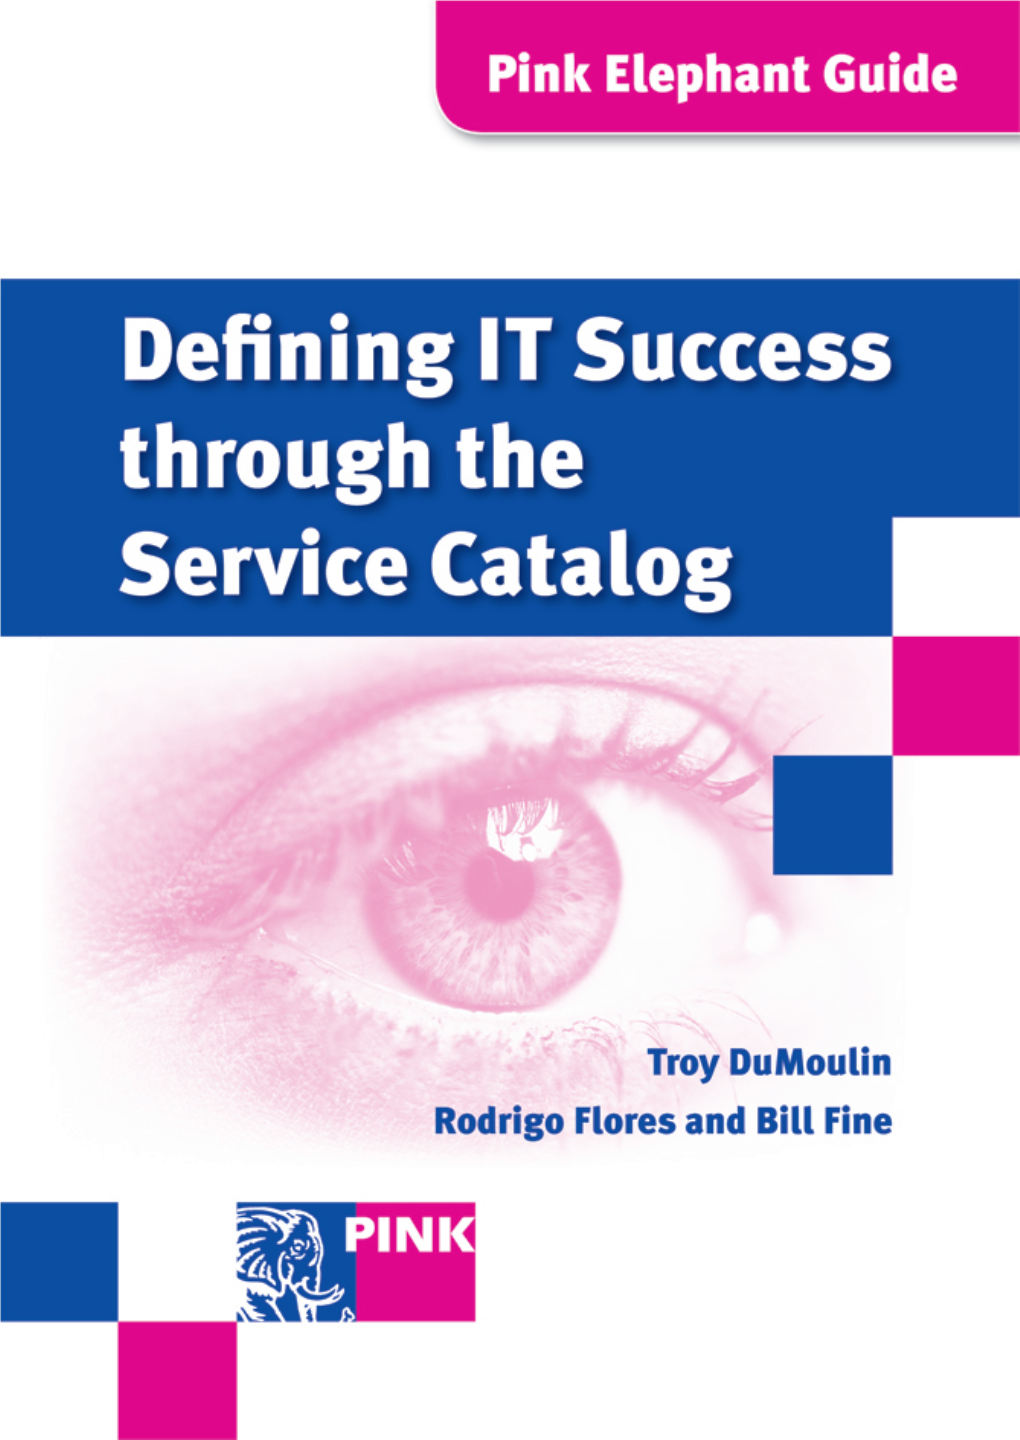 1.3 Starting with the IT Service Catalog